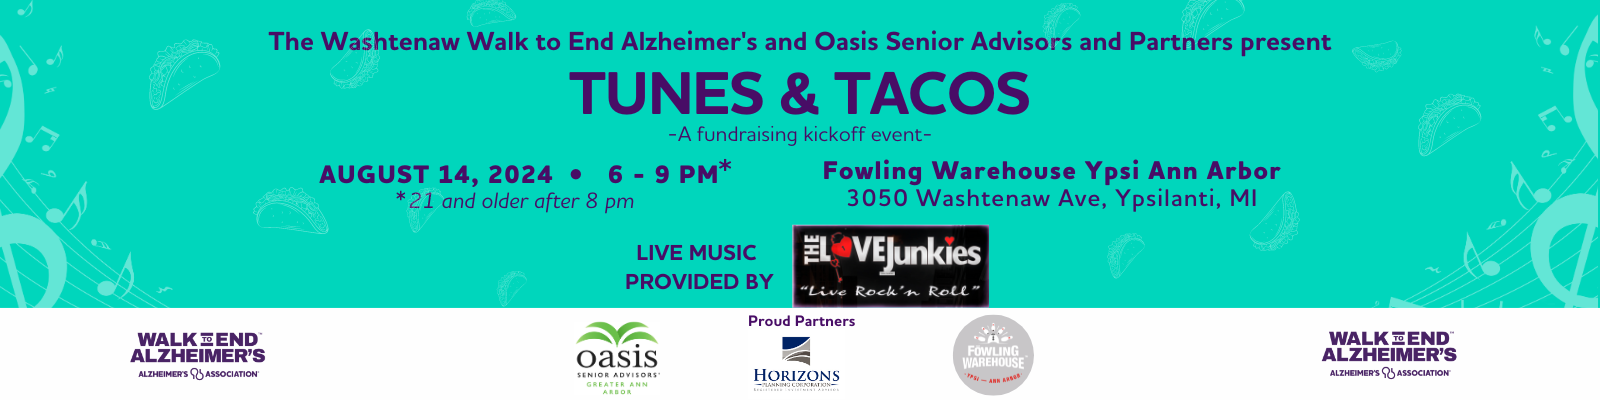 Tunes for Tacos Washtenaw  (1600 x 400 px) (1).png